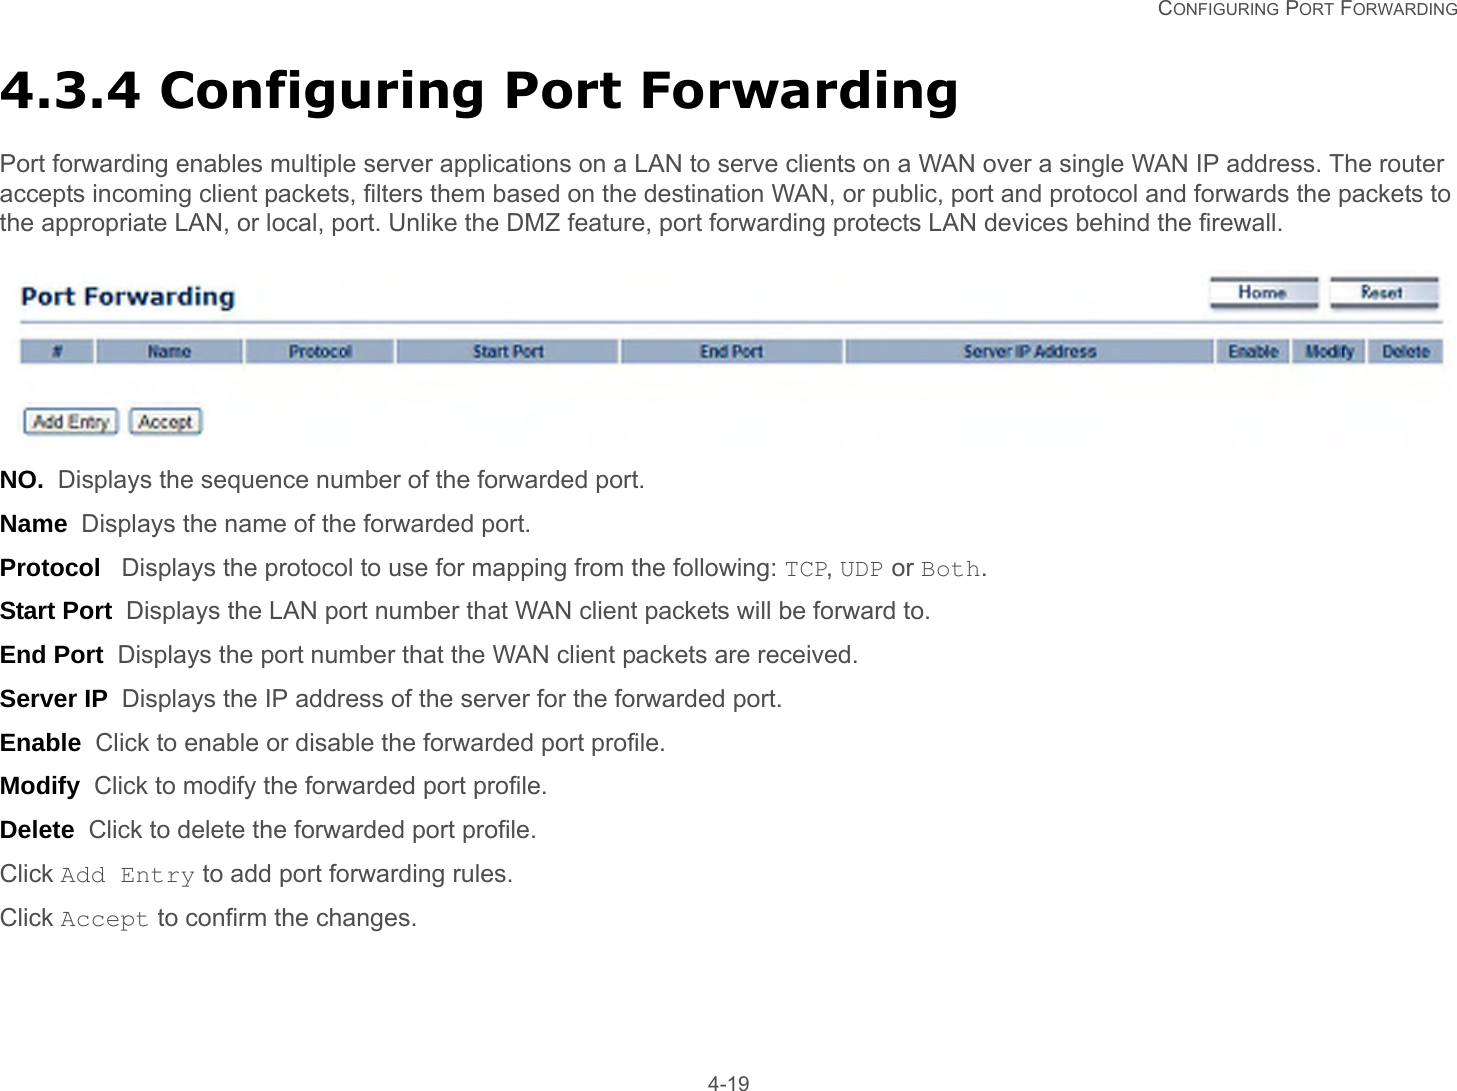   CONFIGURING PORT FORWARDING 4-194.3.4 Configuring Port ForwardingPort forwarding enables multiple server applications on a LAN to serve clients on a WAN over a single WAN IP address. The router accepts incoming client packets, filters them based on the destination WAN, or public, port and protocol and forwards the packets to the appropriate LAN, or local, port. Unlike the DMZ feature, port forwarding protects LAN devices behind the firewall.NO.  Displays the sequence number of the forwarded port.Name  Displays the name of the forwarded port.Protocol   Displays the protocol to use for mapping from the following: TCP, UDP or Both.Start Port  Displays the LAN port number that WAN client packets will be forward to.End Port  Displays the port number that the WAN client packets are received.Server IP  Displays the IP address of the server for the forwarded port.Enable  Click to enable or disable the forwarded port profile.Modify  Click to modify the forwarded port profile.Delete  Click to delete the forwarded port profile.Click Add Entry to add port forwarding rules.Click Accept to confirm the changes.